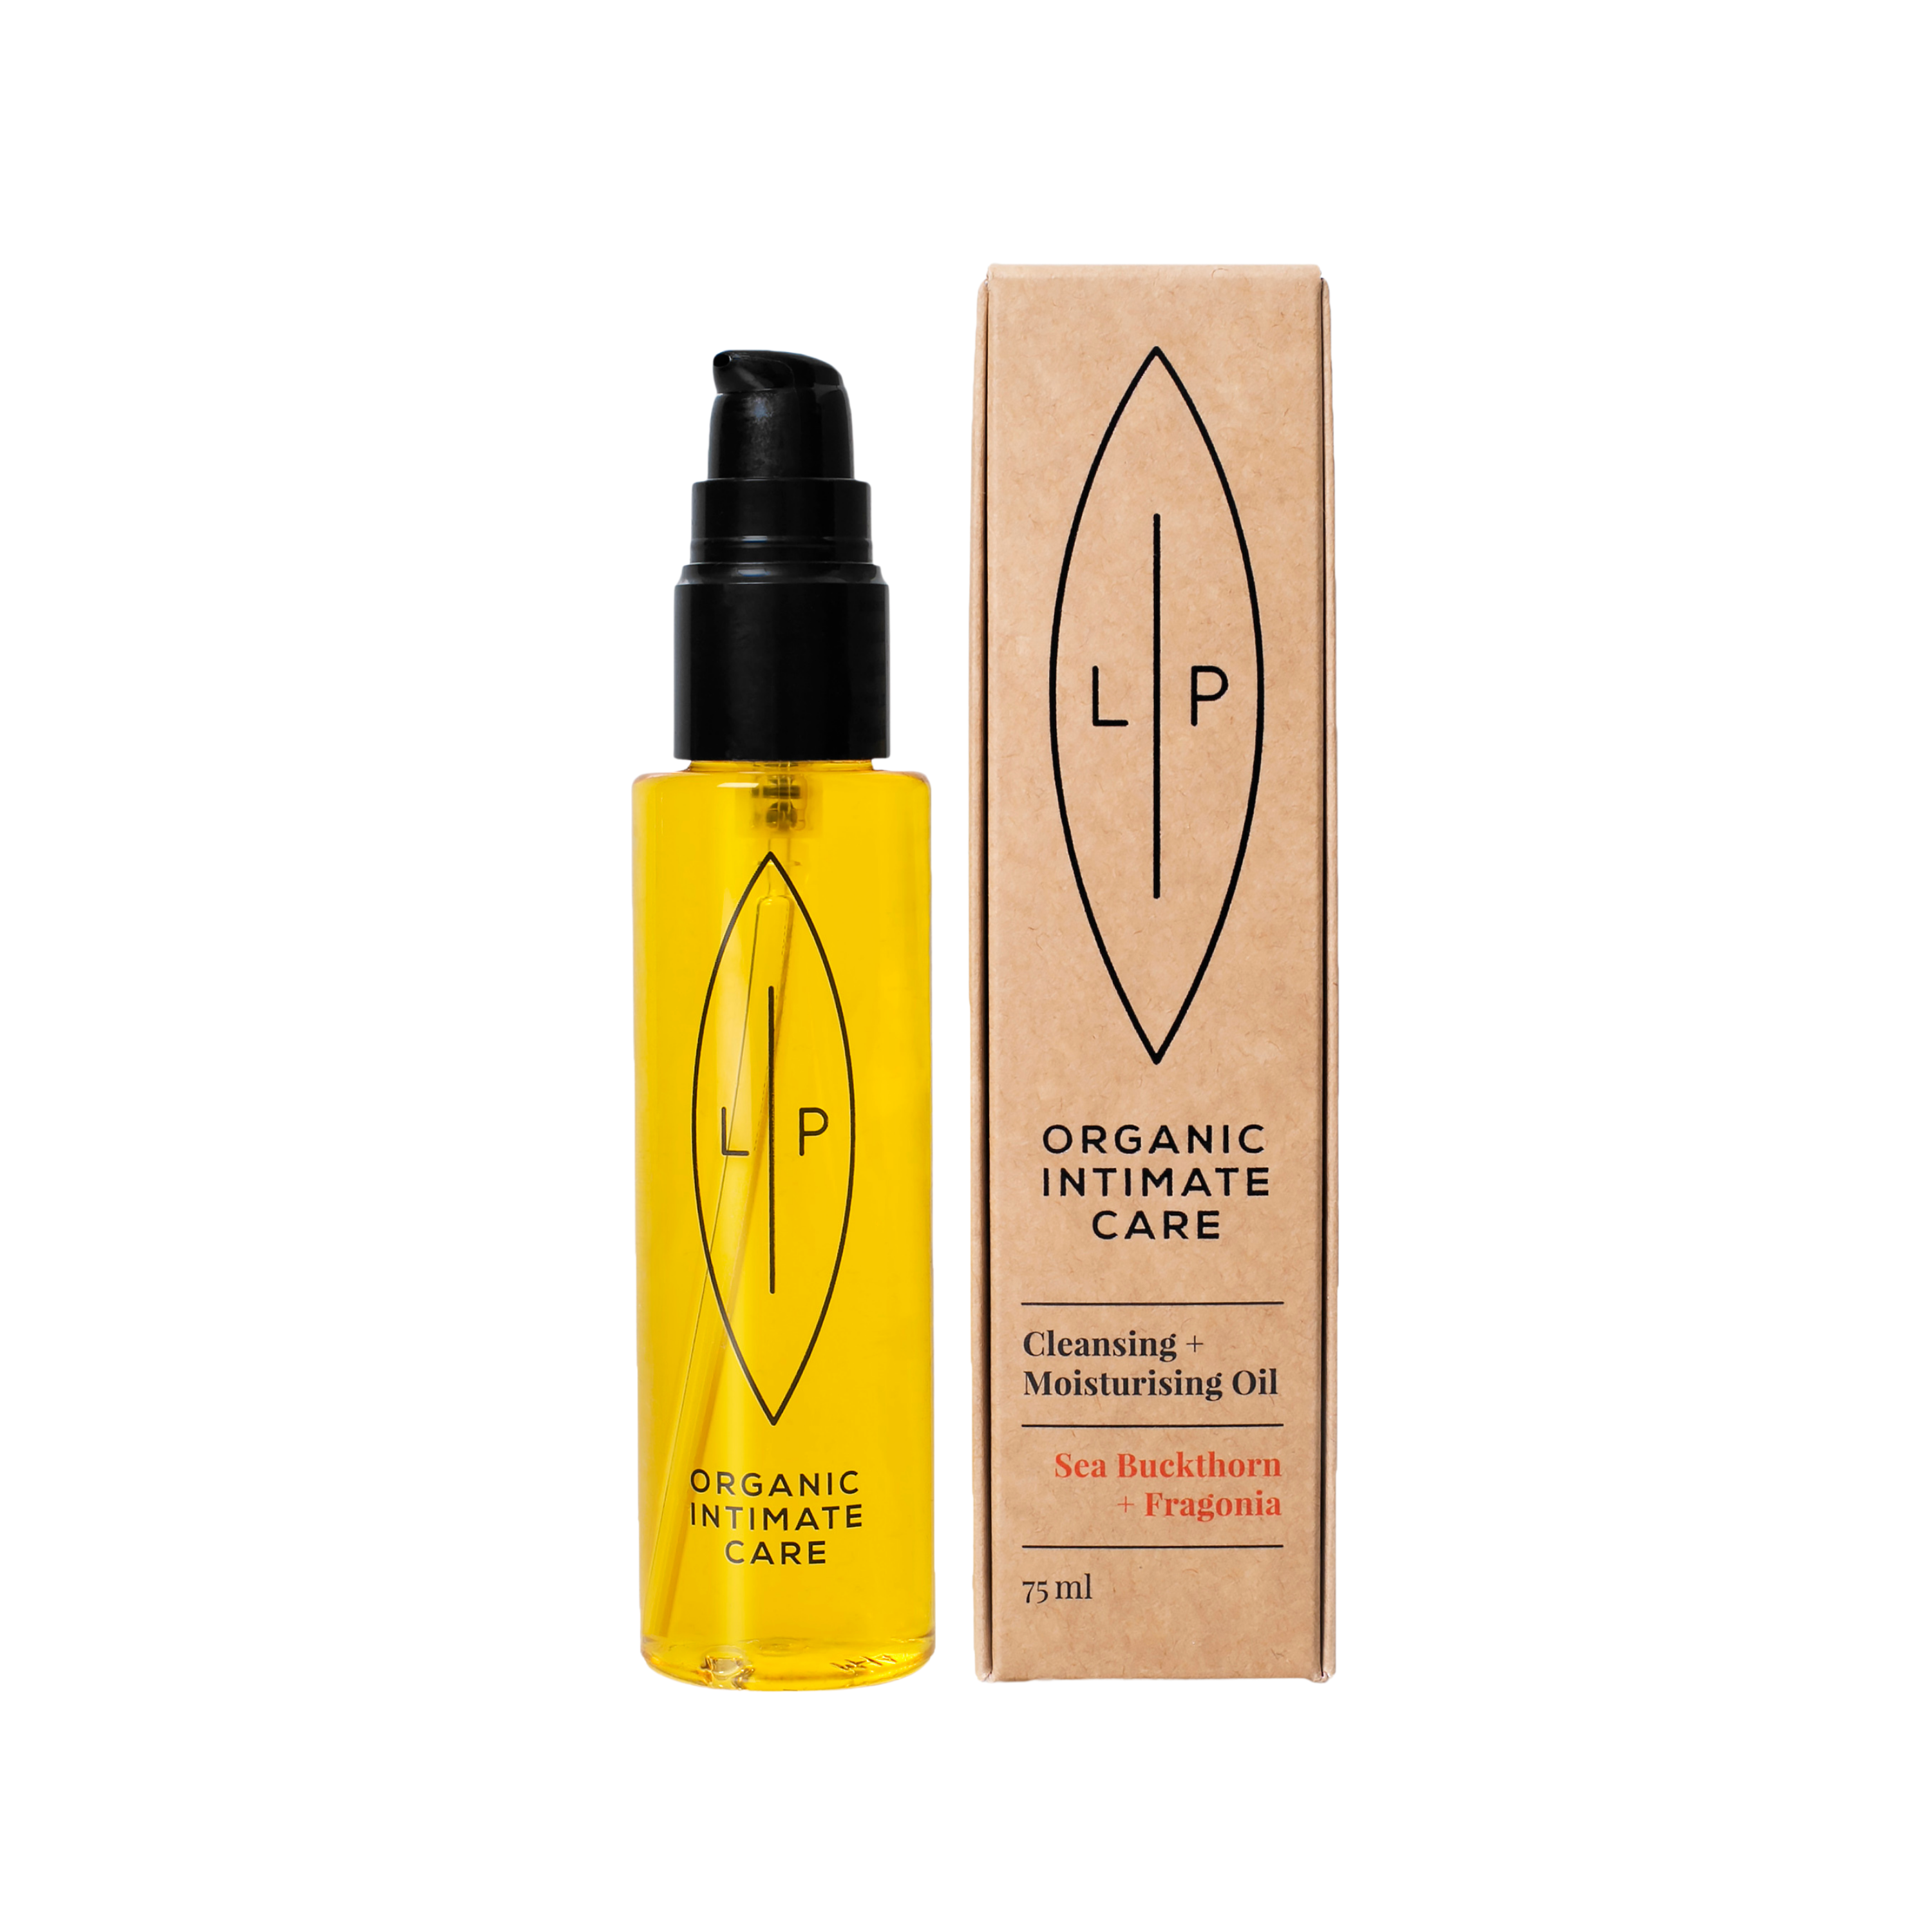 Cleansing and Moisturising Oil 75ml